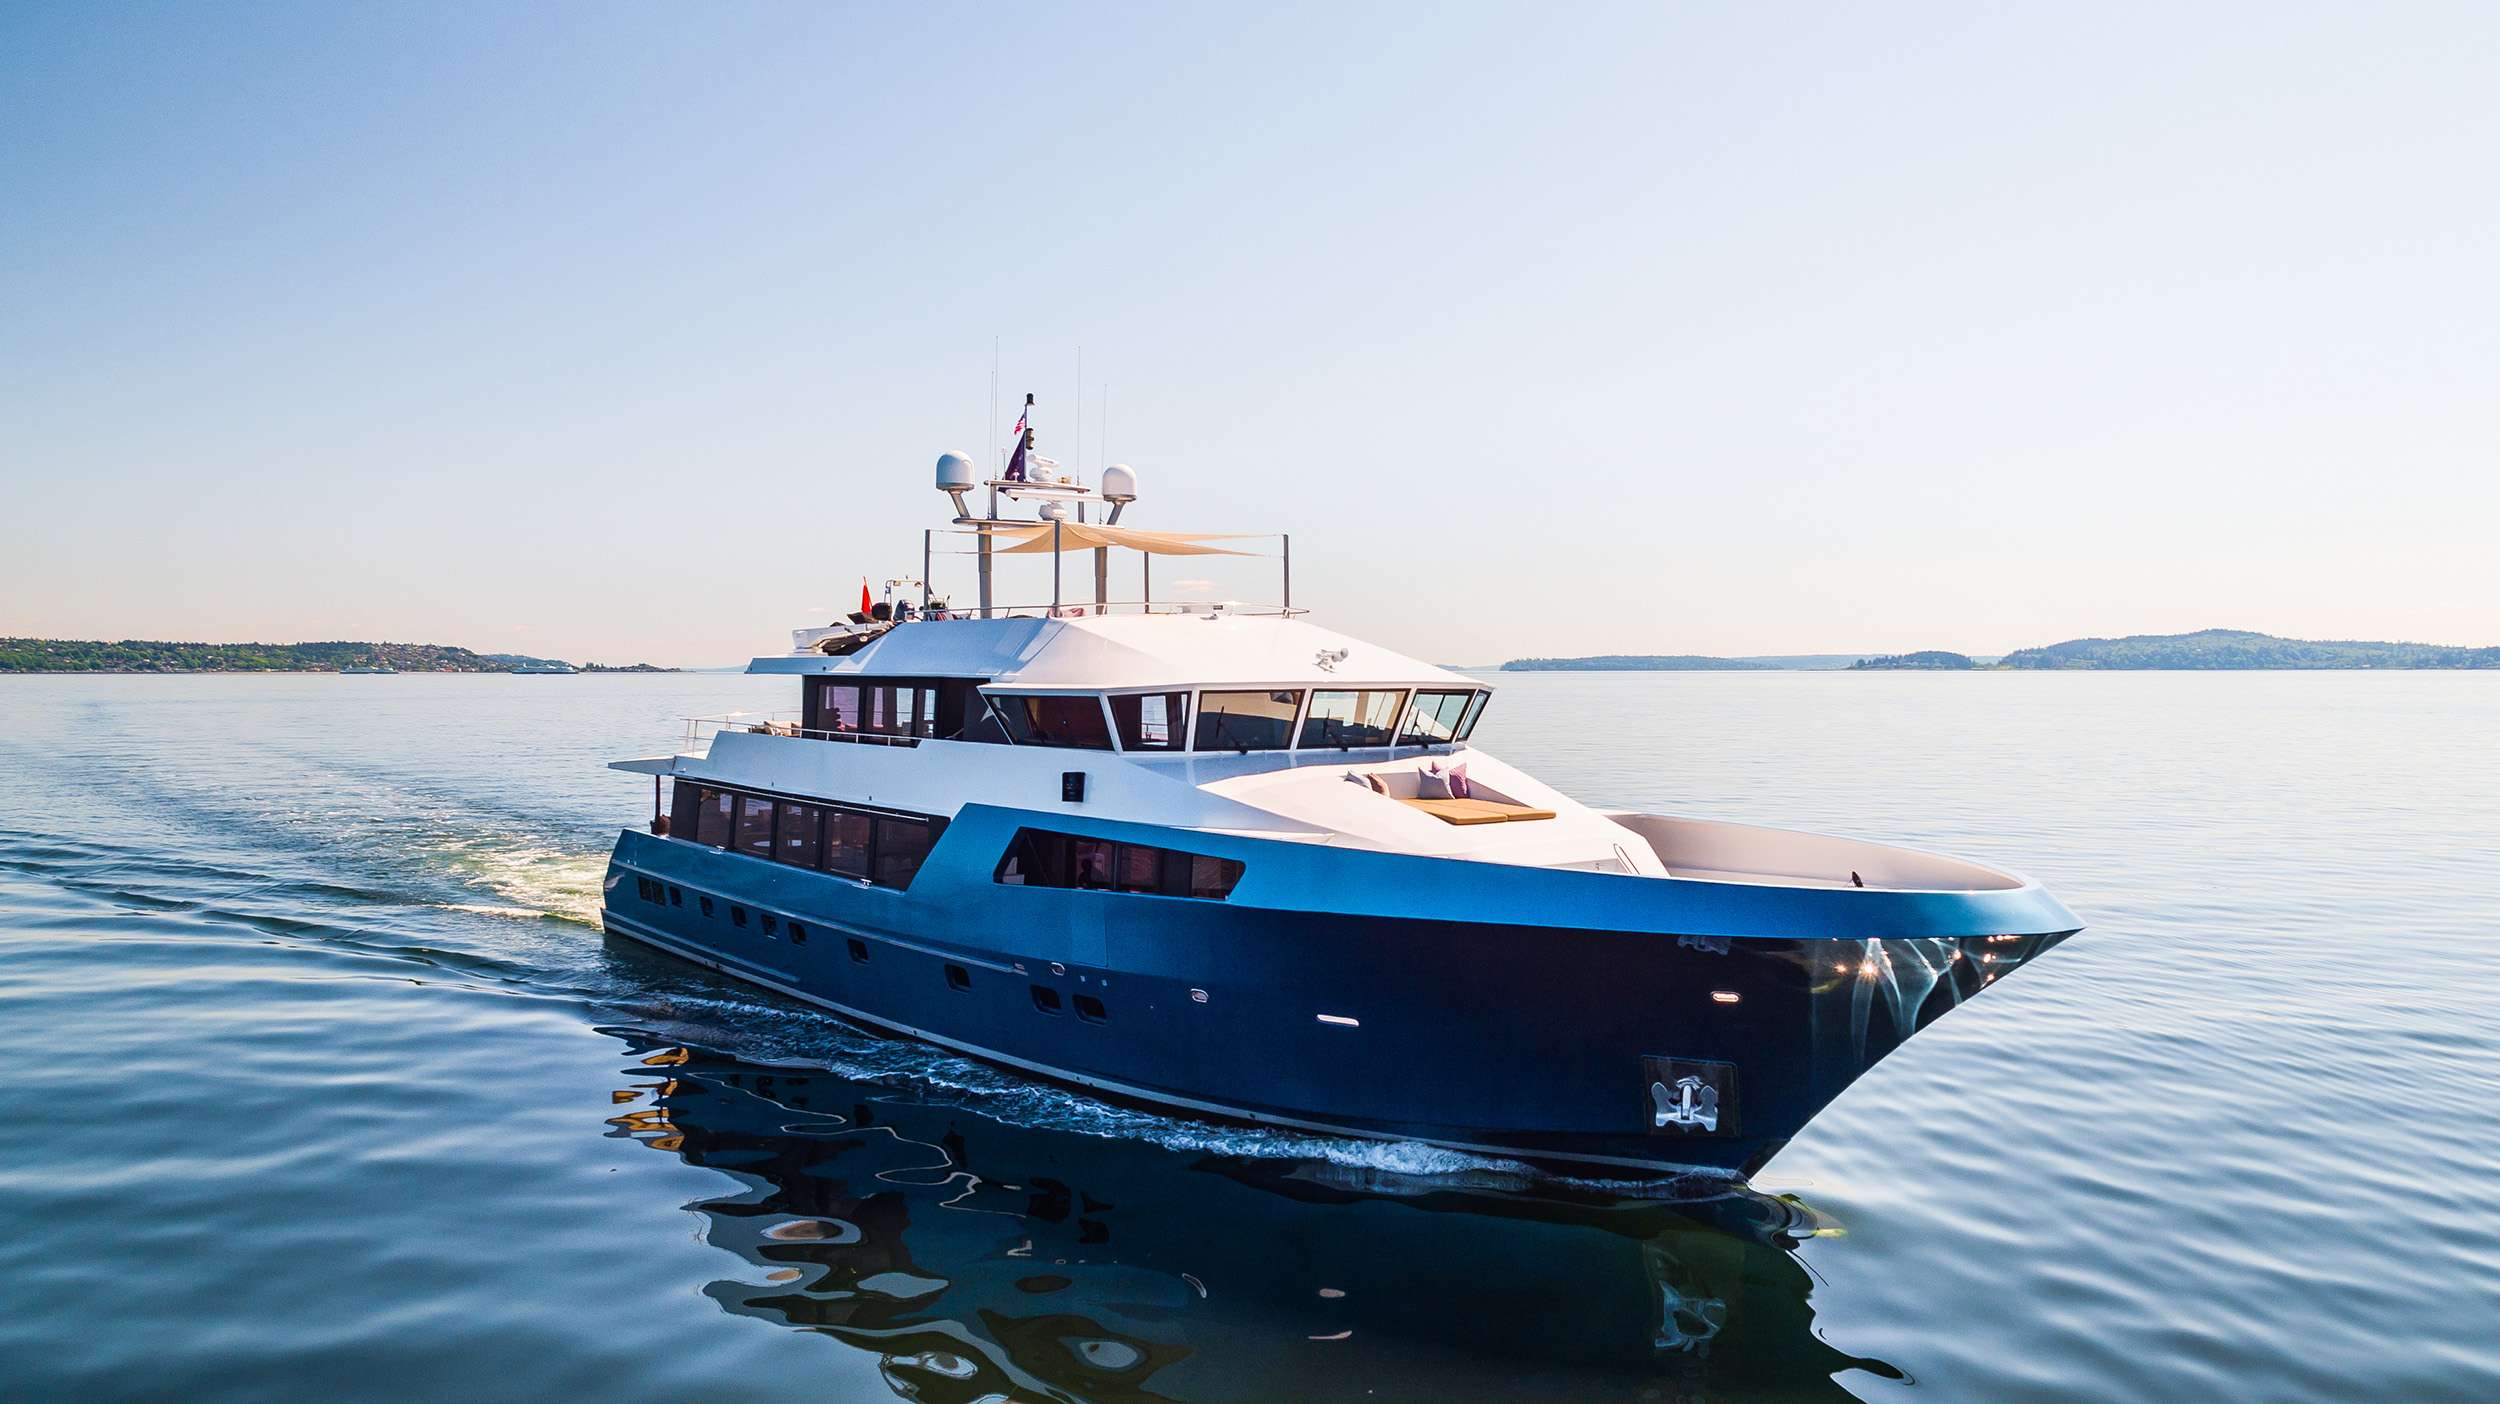 ASCENTE - Yacht Charter Canada & Boat hire in Pacific North West & Canada 1